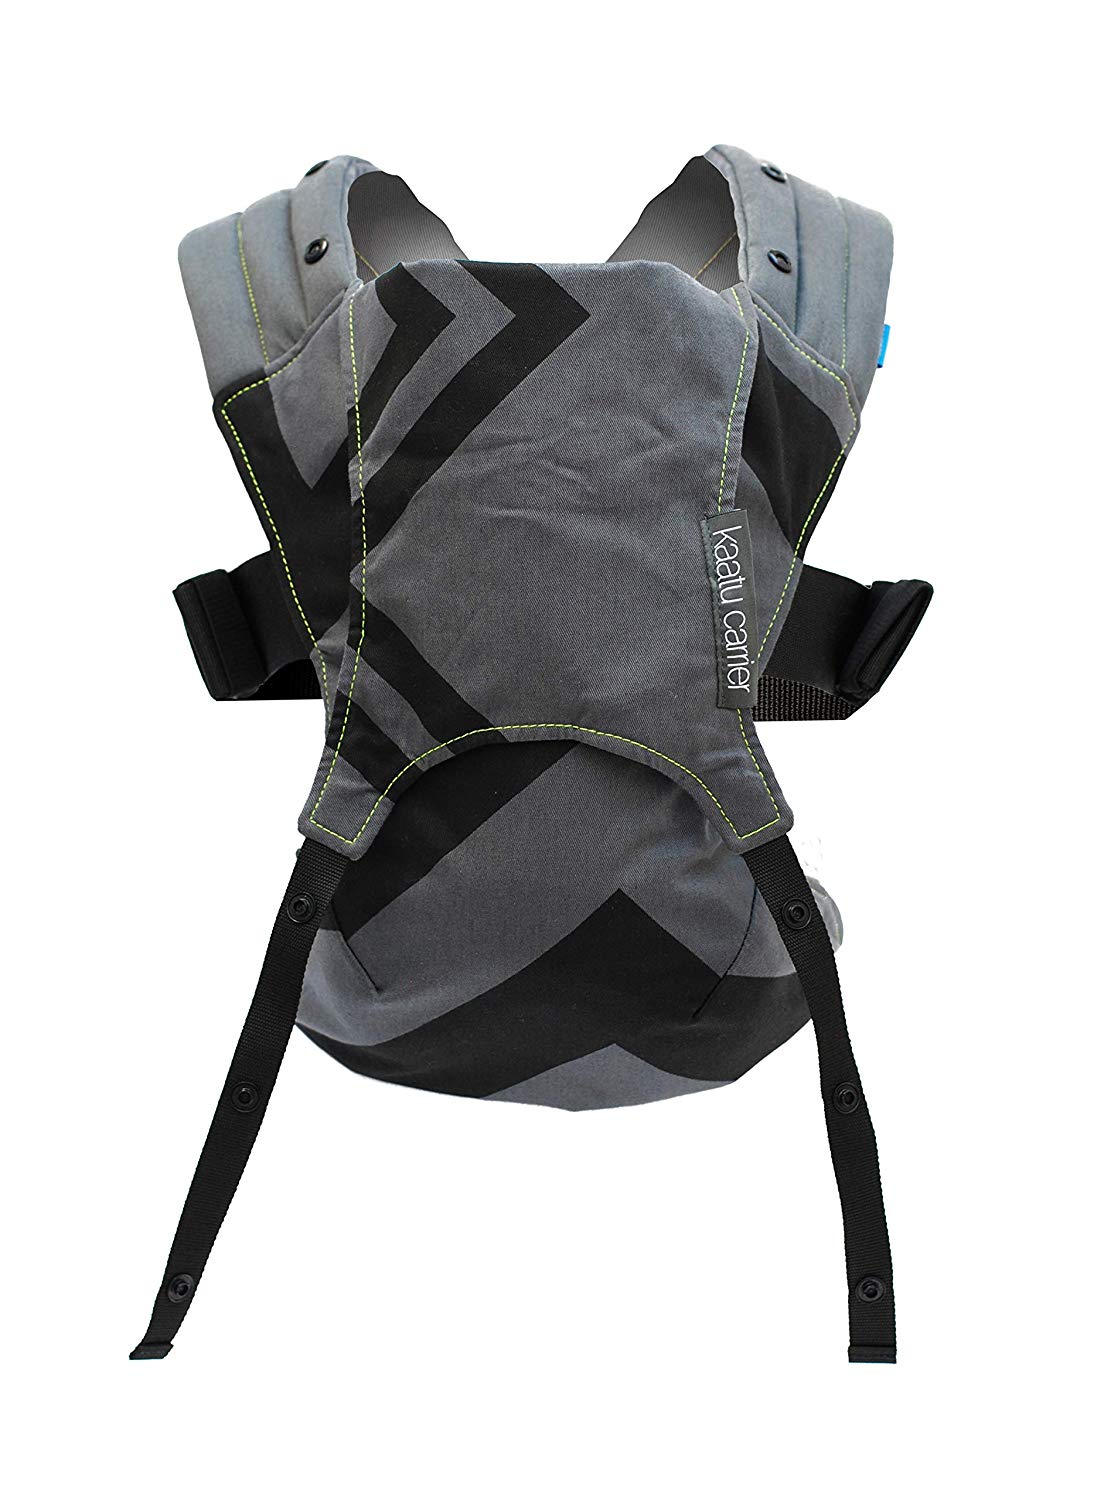 We Made Me Venture+ 2-in-1 Toddler Back and Tummy Harness 11-25kg (18-36m) Black Charcoal Zigzag